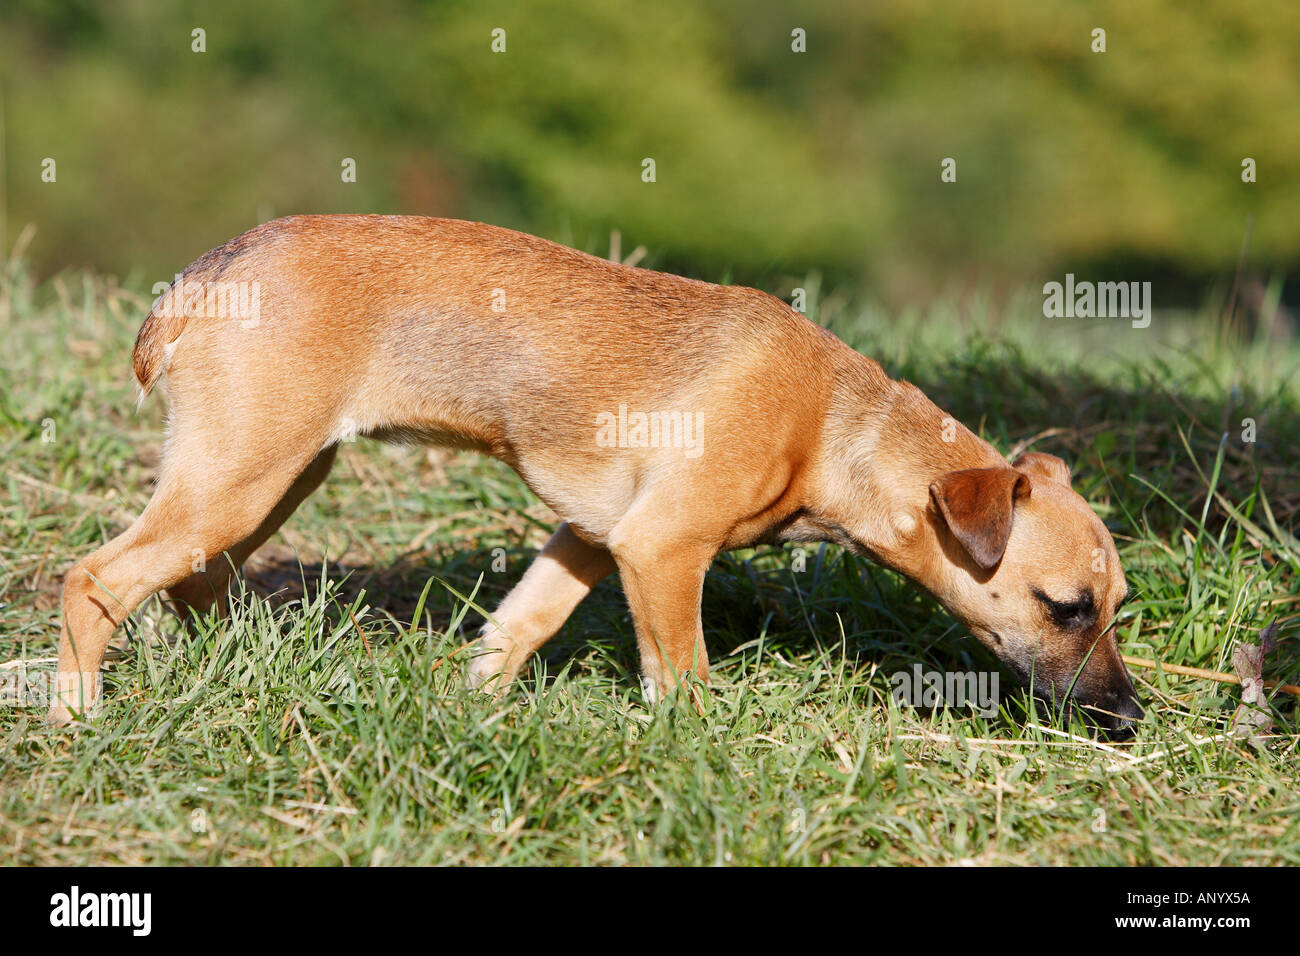 Jack Russell Cross Patterdale Terrier Puppy Sniffing At The Grass Stock Photo Alamy